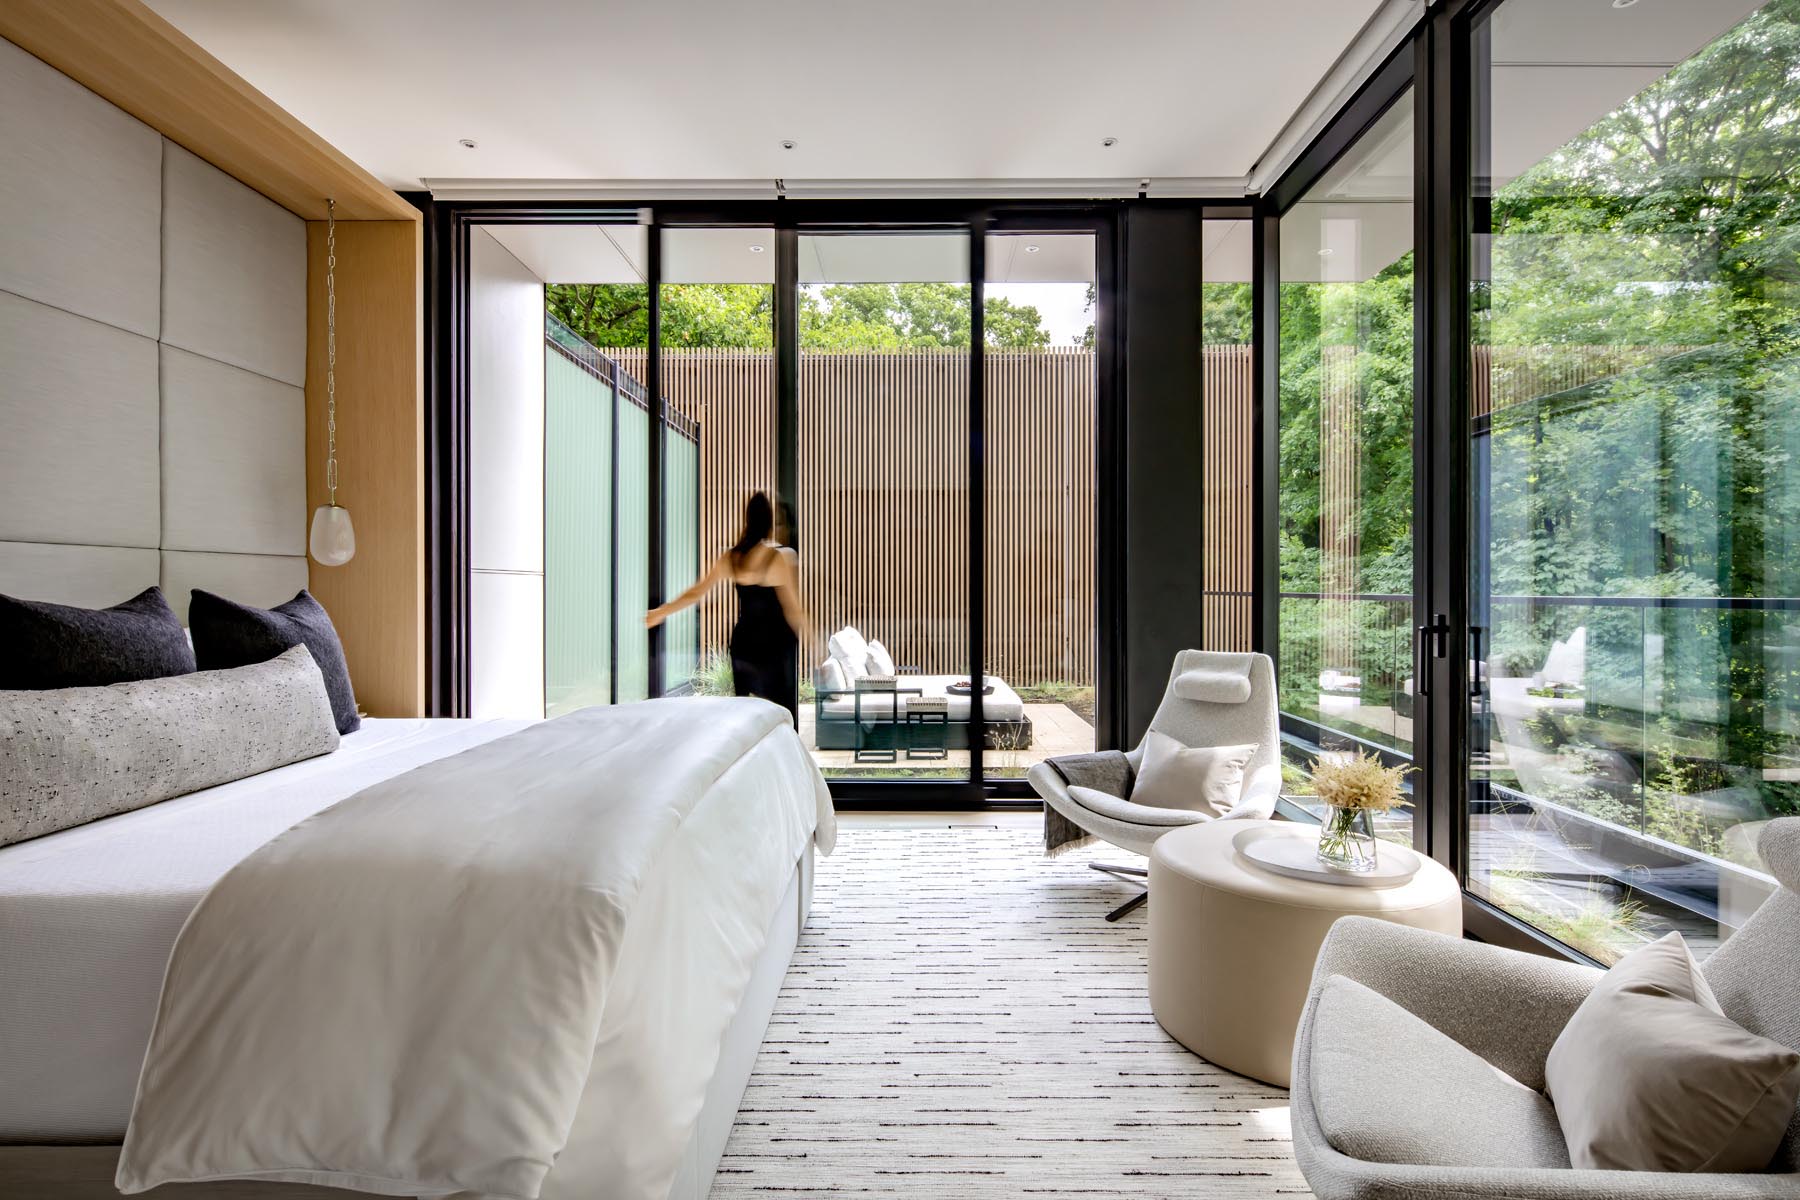 This modern primary bedroom has floor-to-ceiling windows, and a sliding glass opens to a private outdoor space.